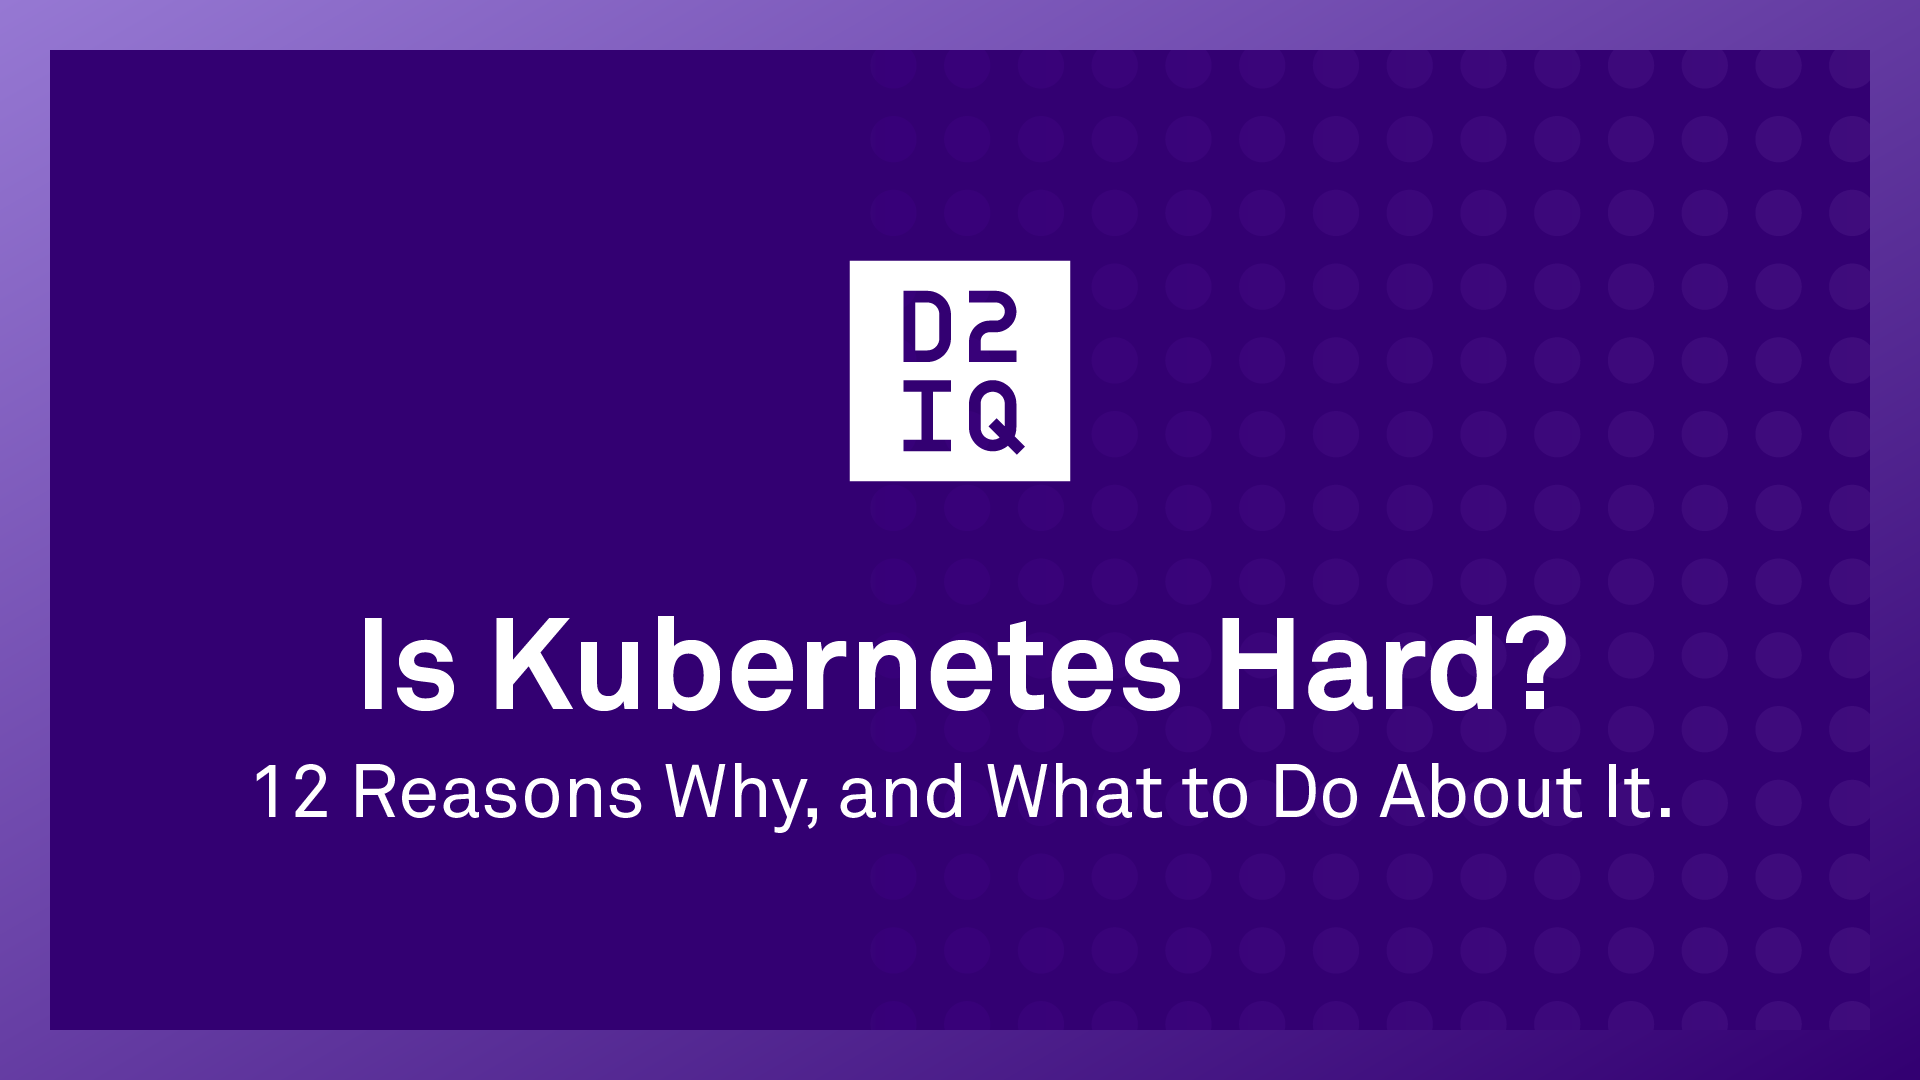 Is Kubernetes Hard? 12 Reasons Why, and What to Do About It